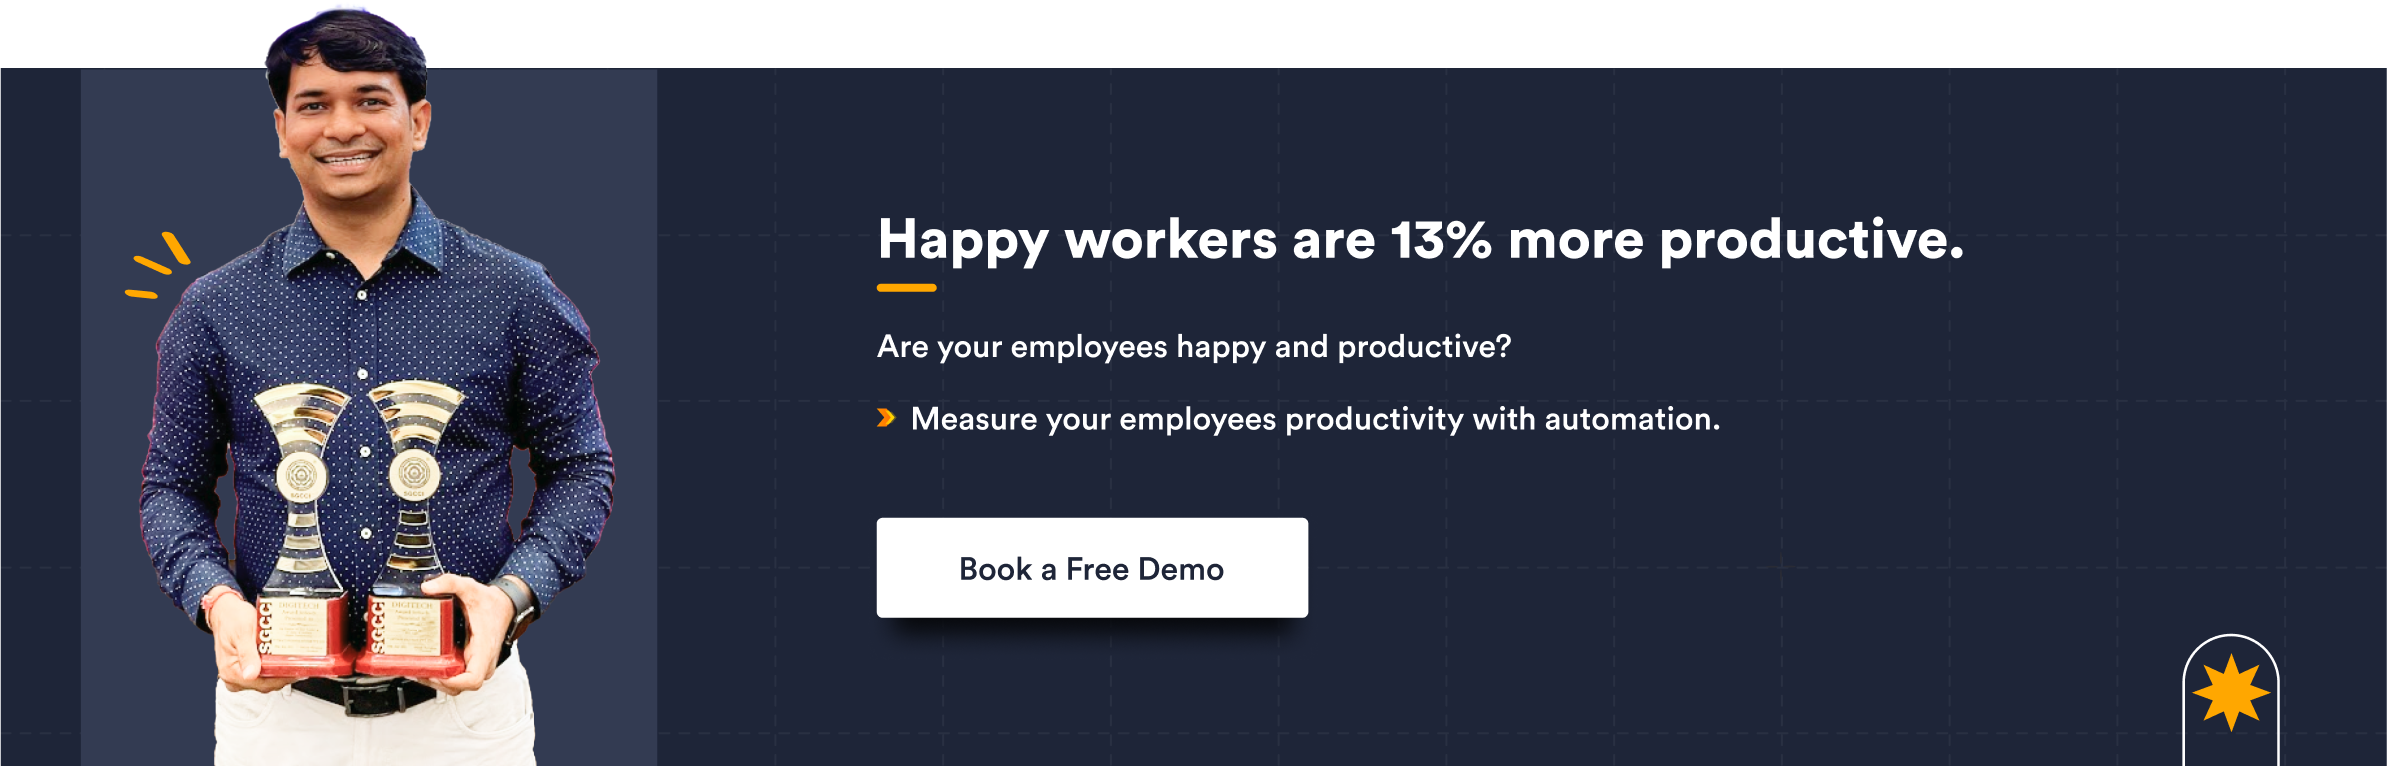 Happy workers are 13 more productive.